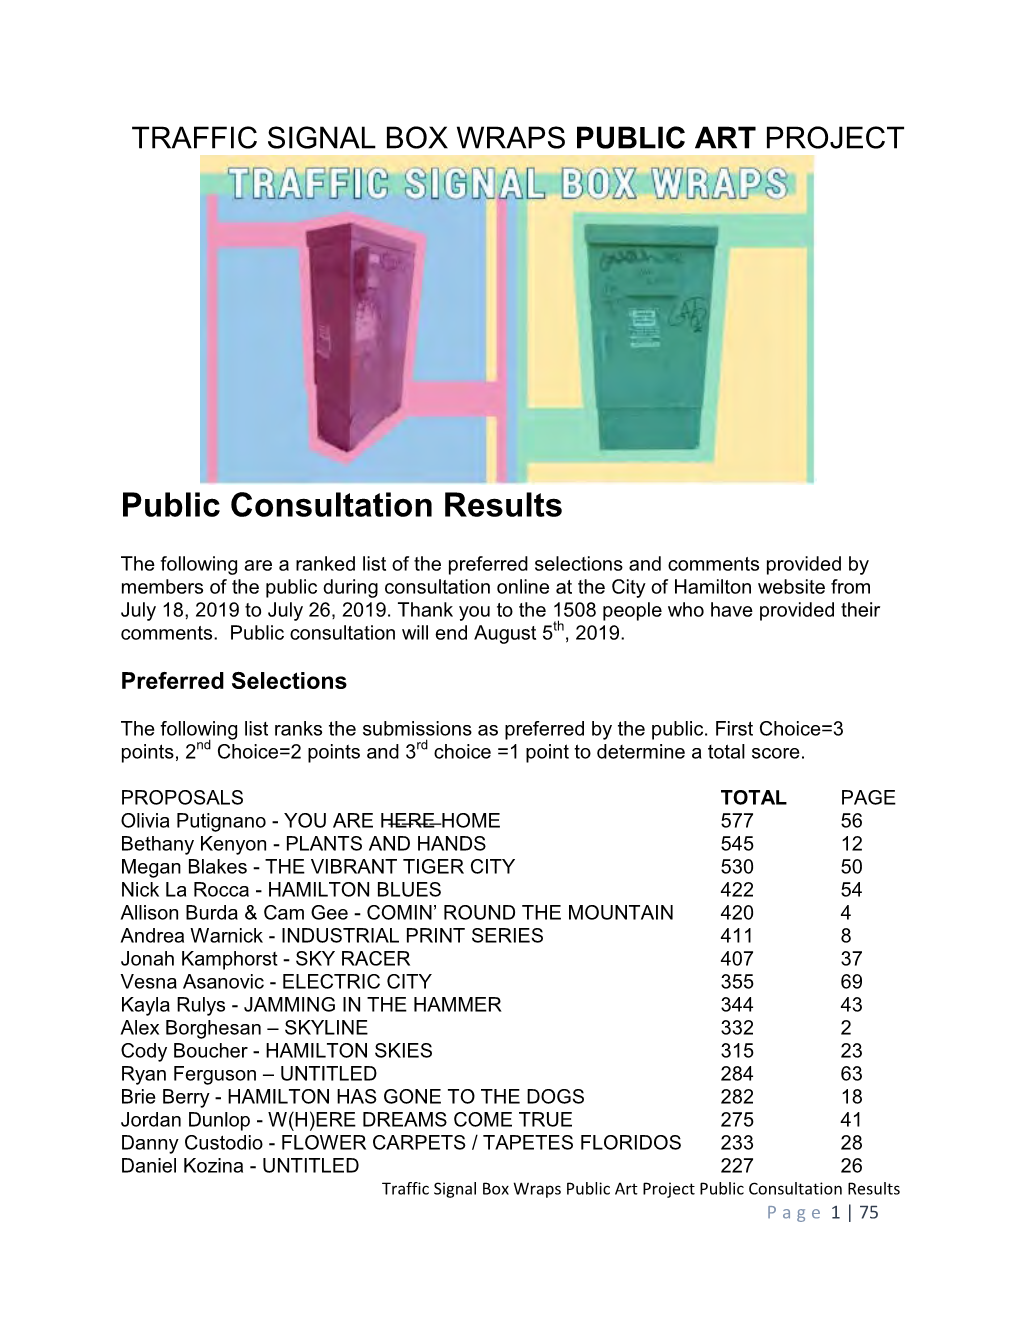 Public Consultation Results July 18 to 26, 2019